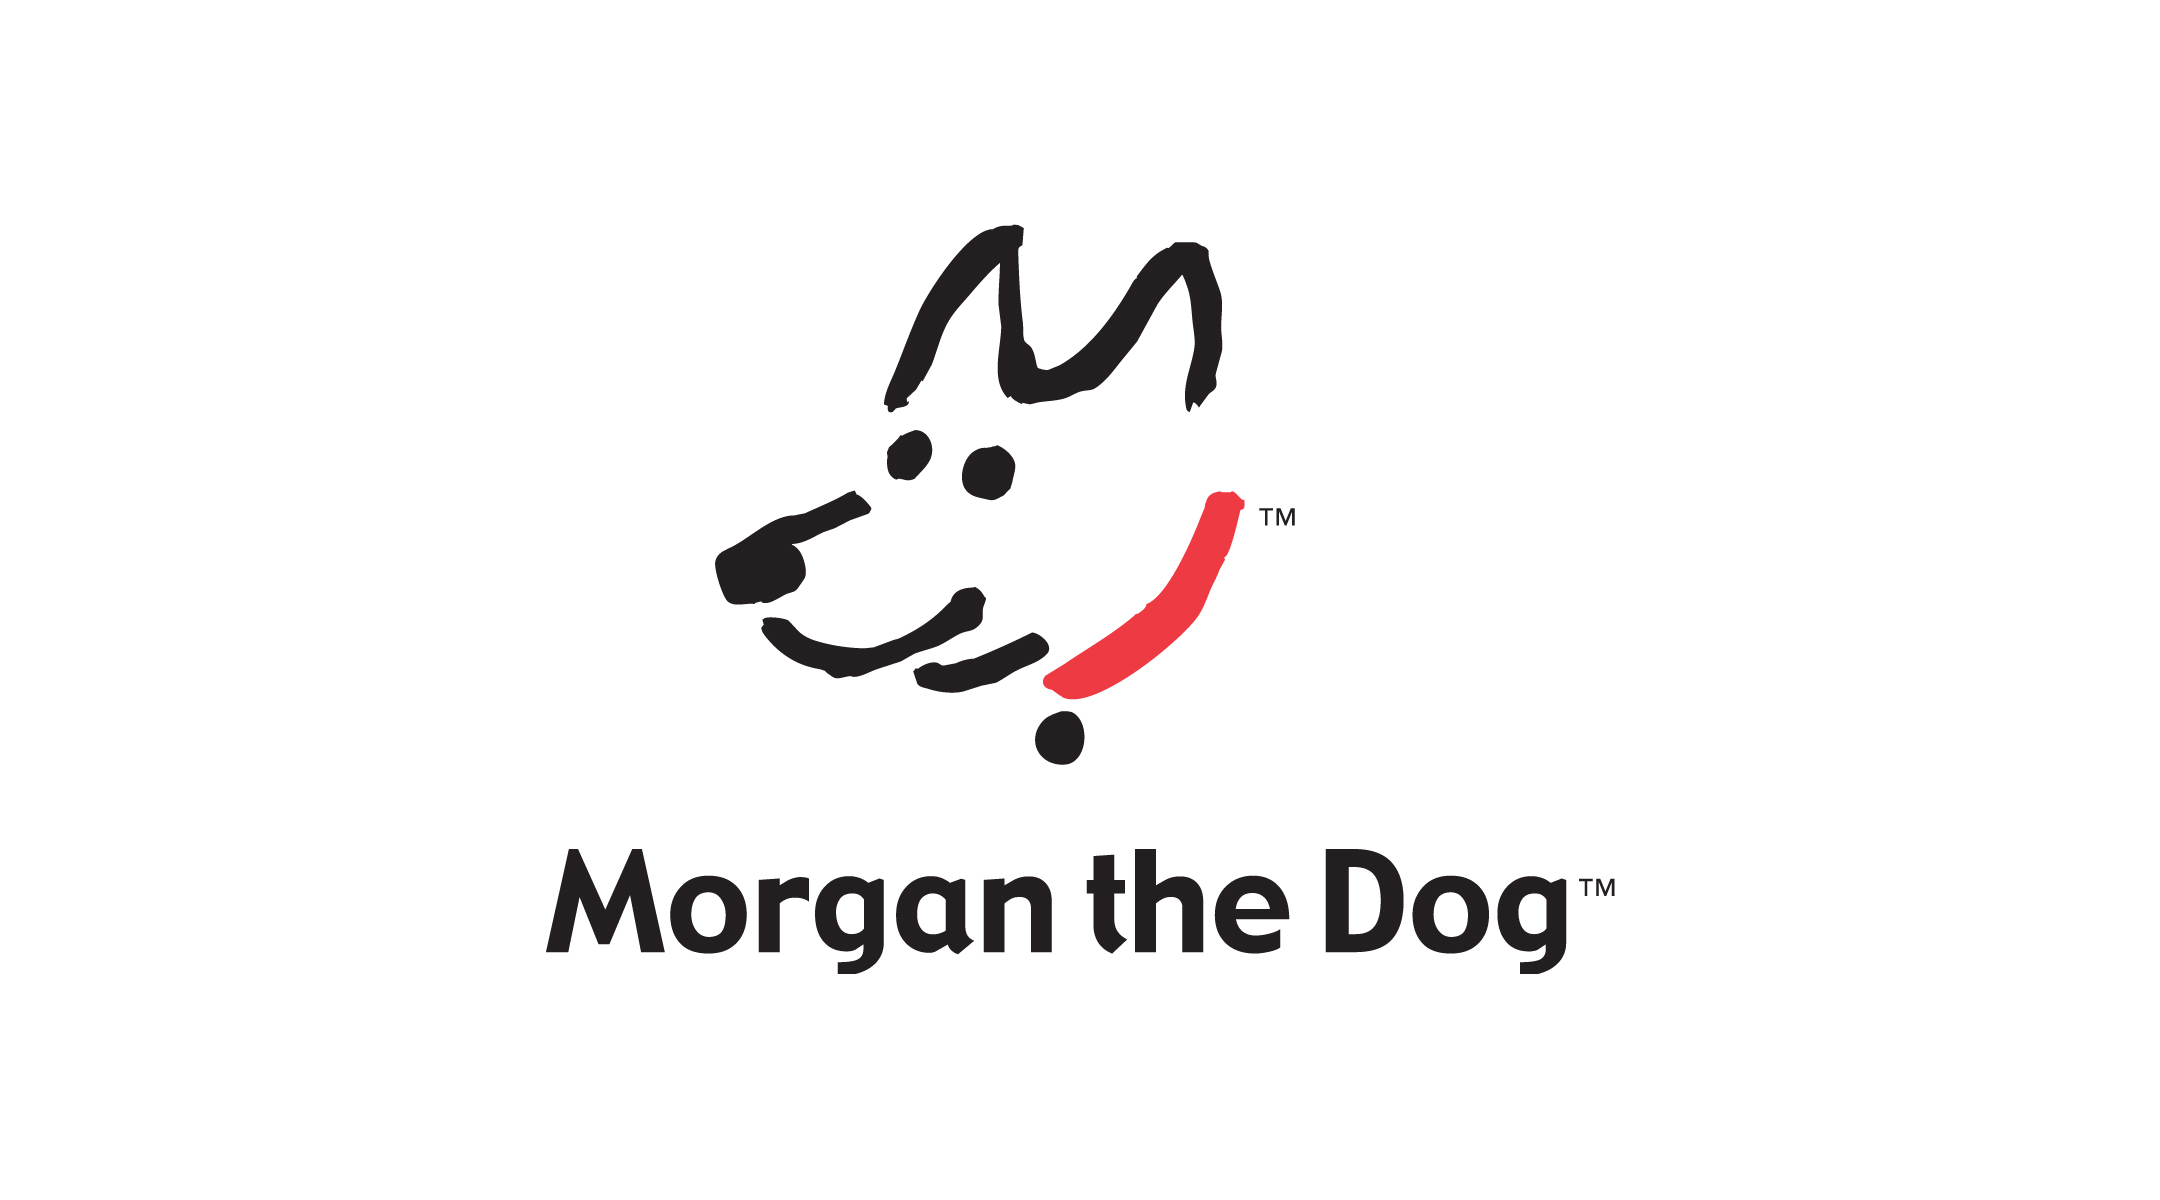 Logotype created for Morgan the Dog, an illustrated children's book series.